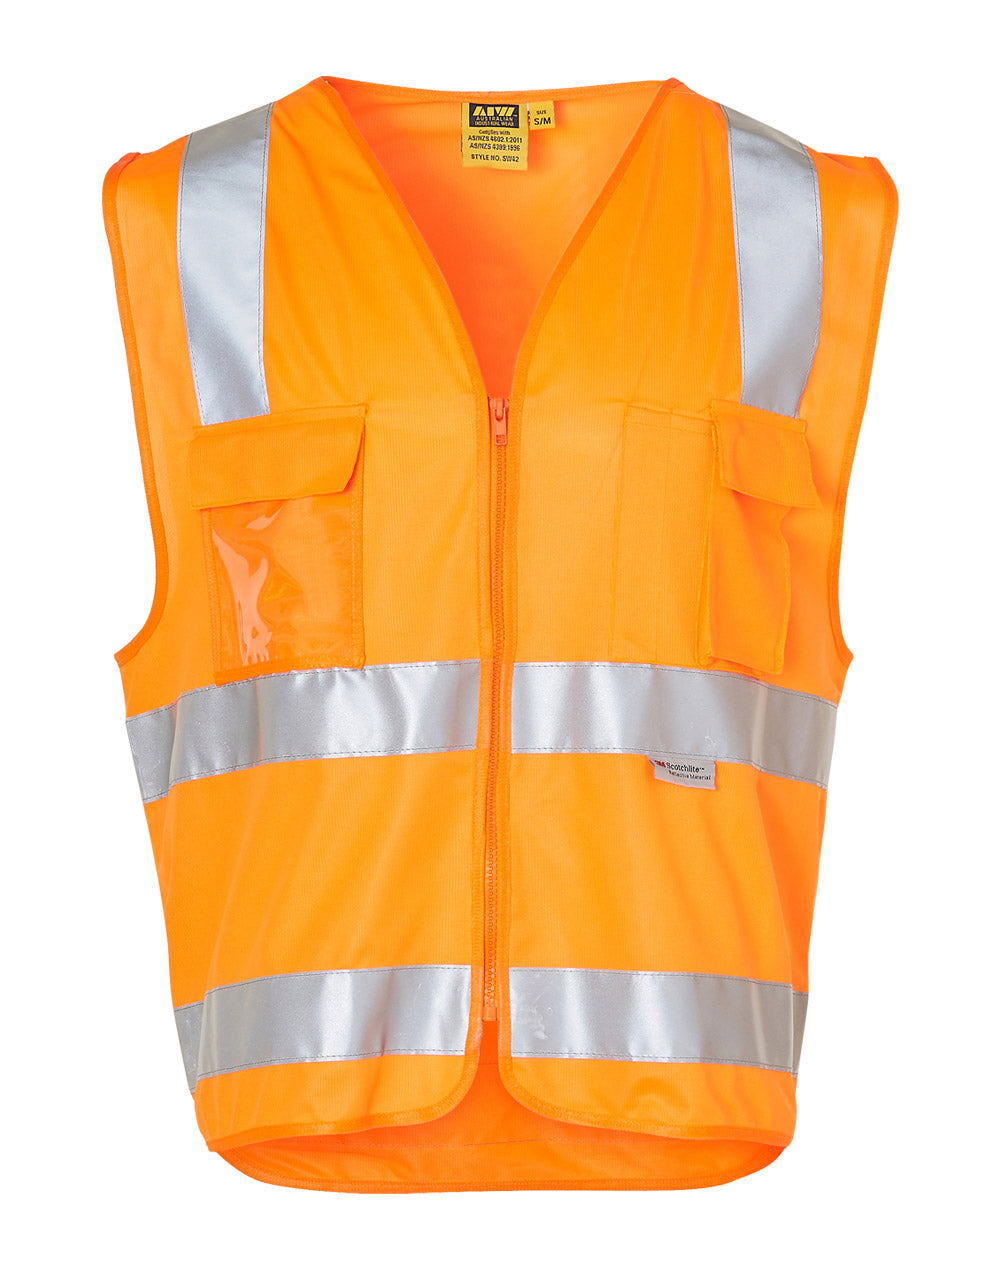 Hivis Day Night Safetyvest Id Pocket - made by AIW